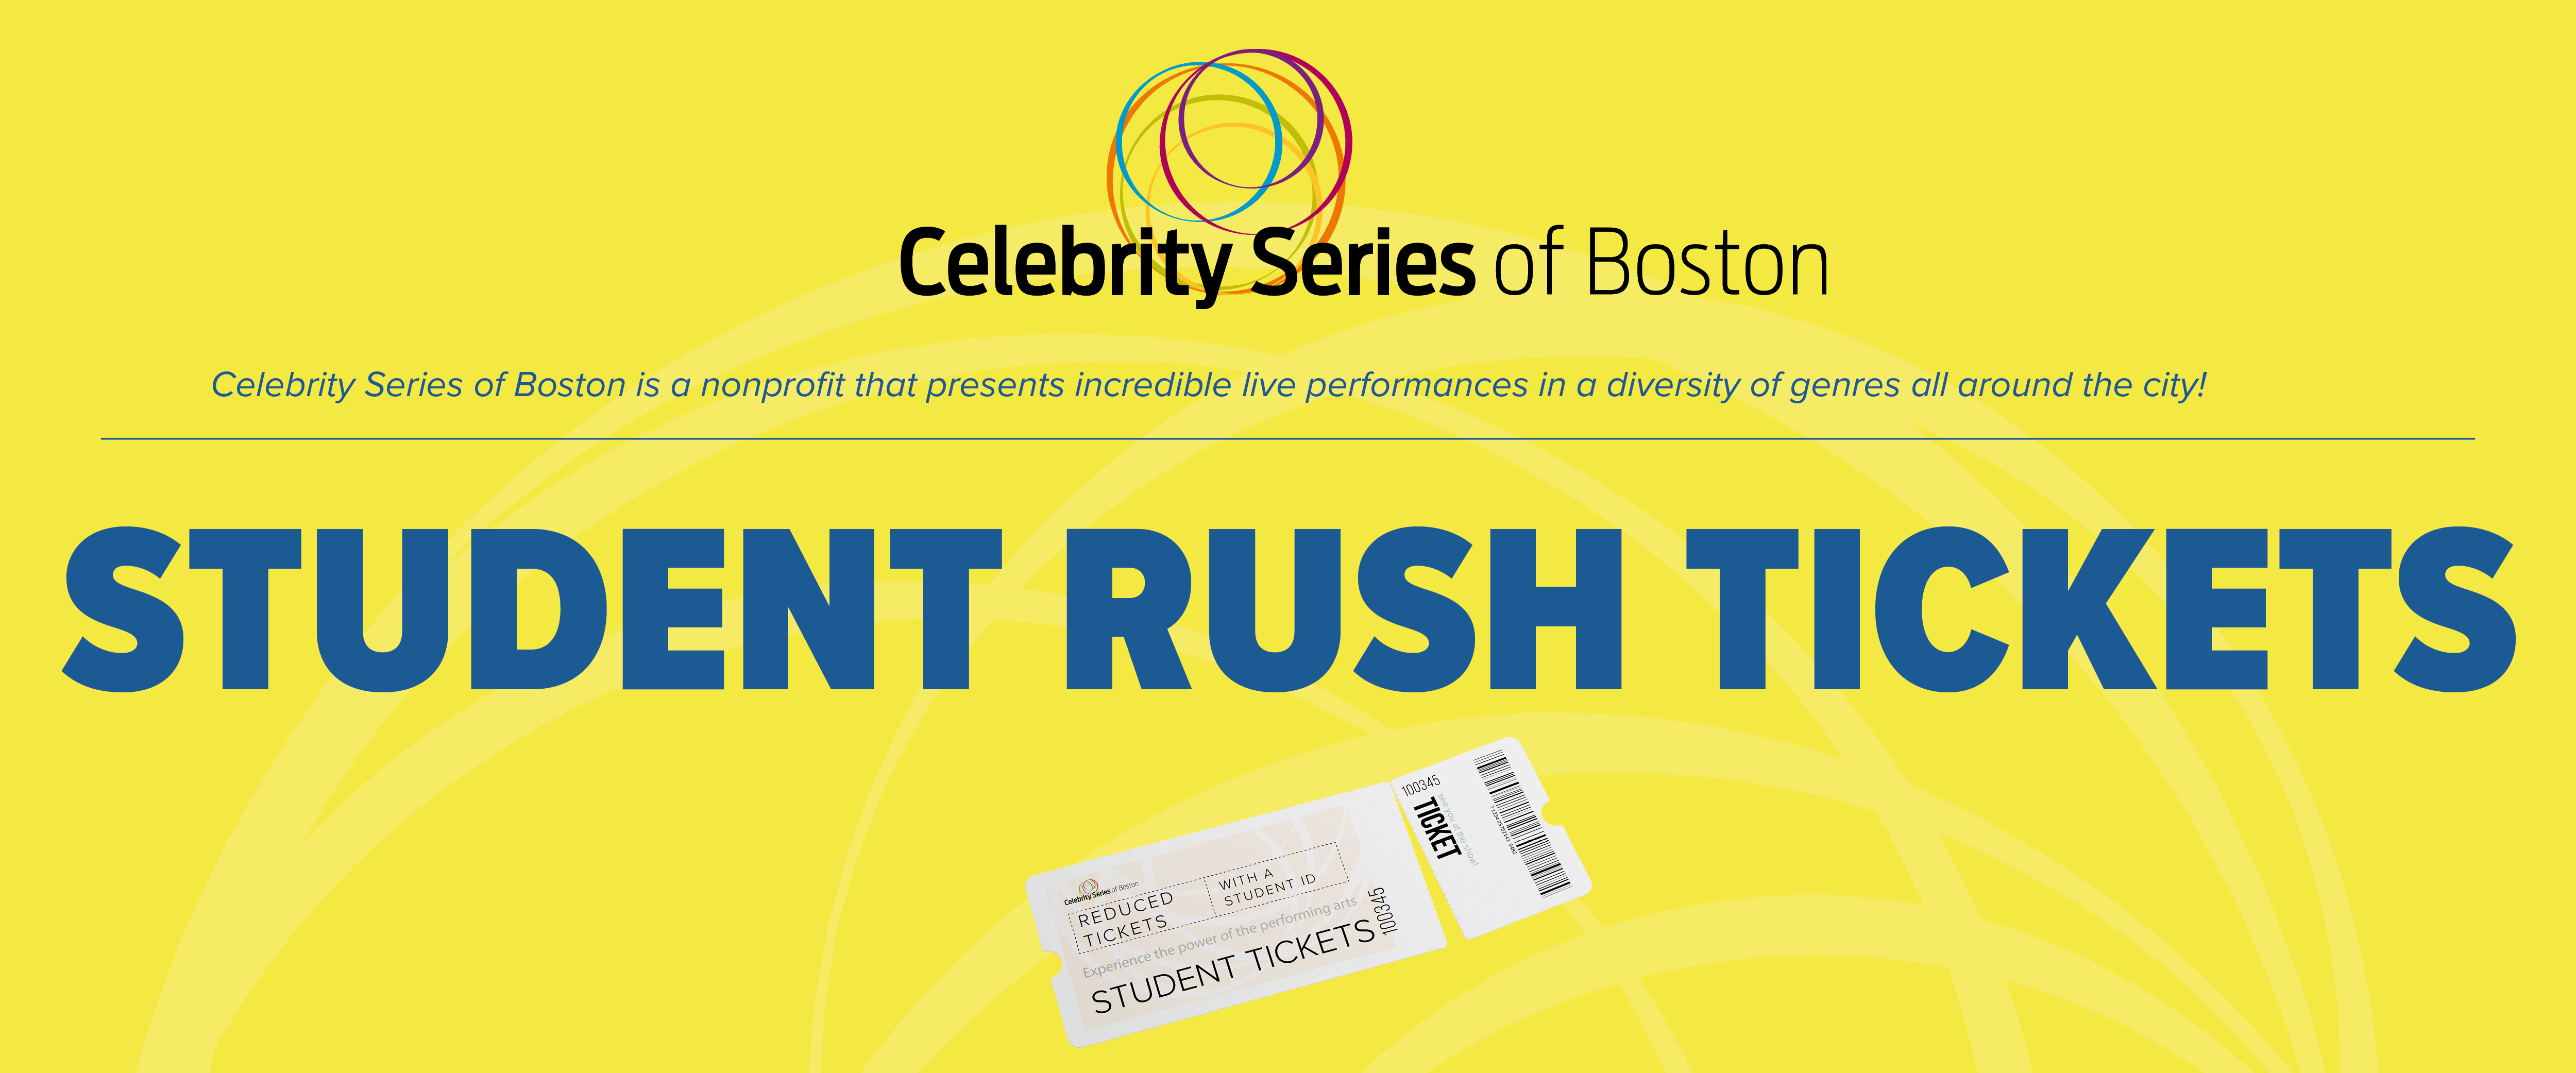 Blue text over neon yellow graphic that reads "Student Rush Tickets." Celebrity Series logo is centered on the top and under the text is an image of a ticket stub.